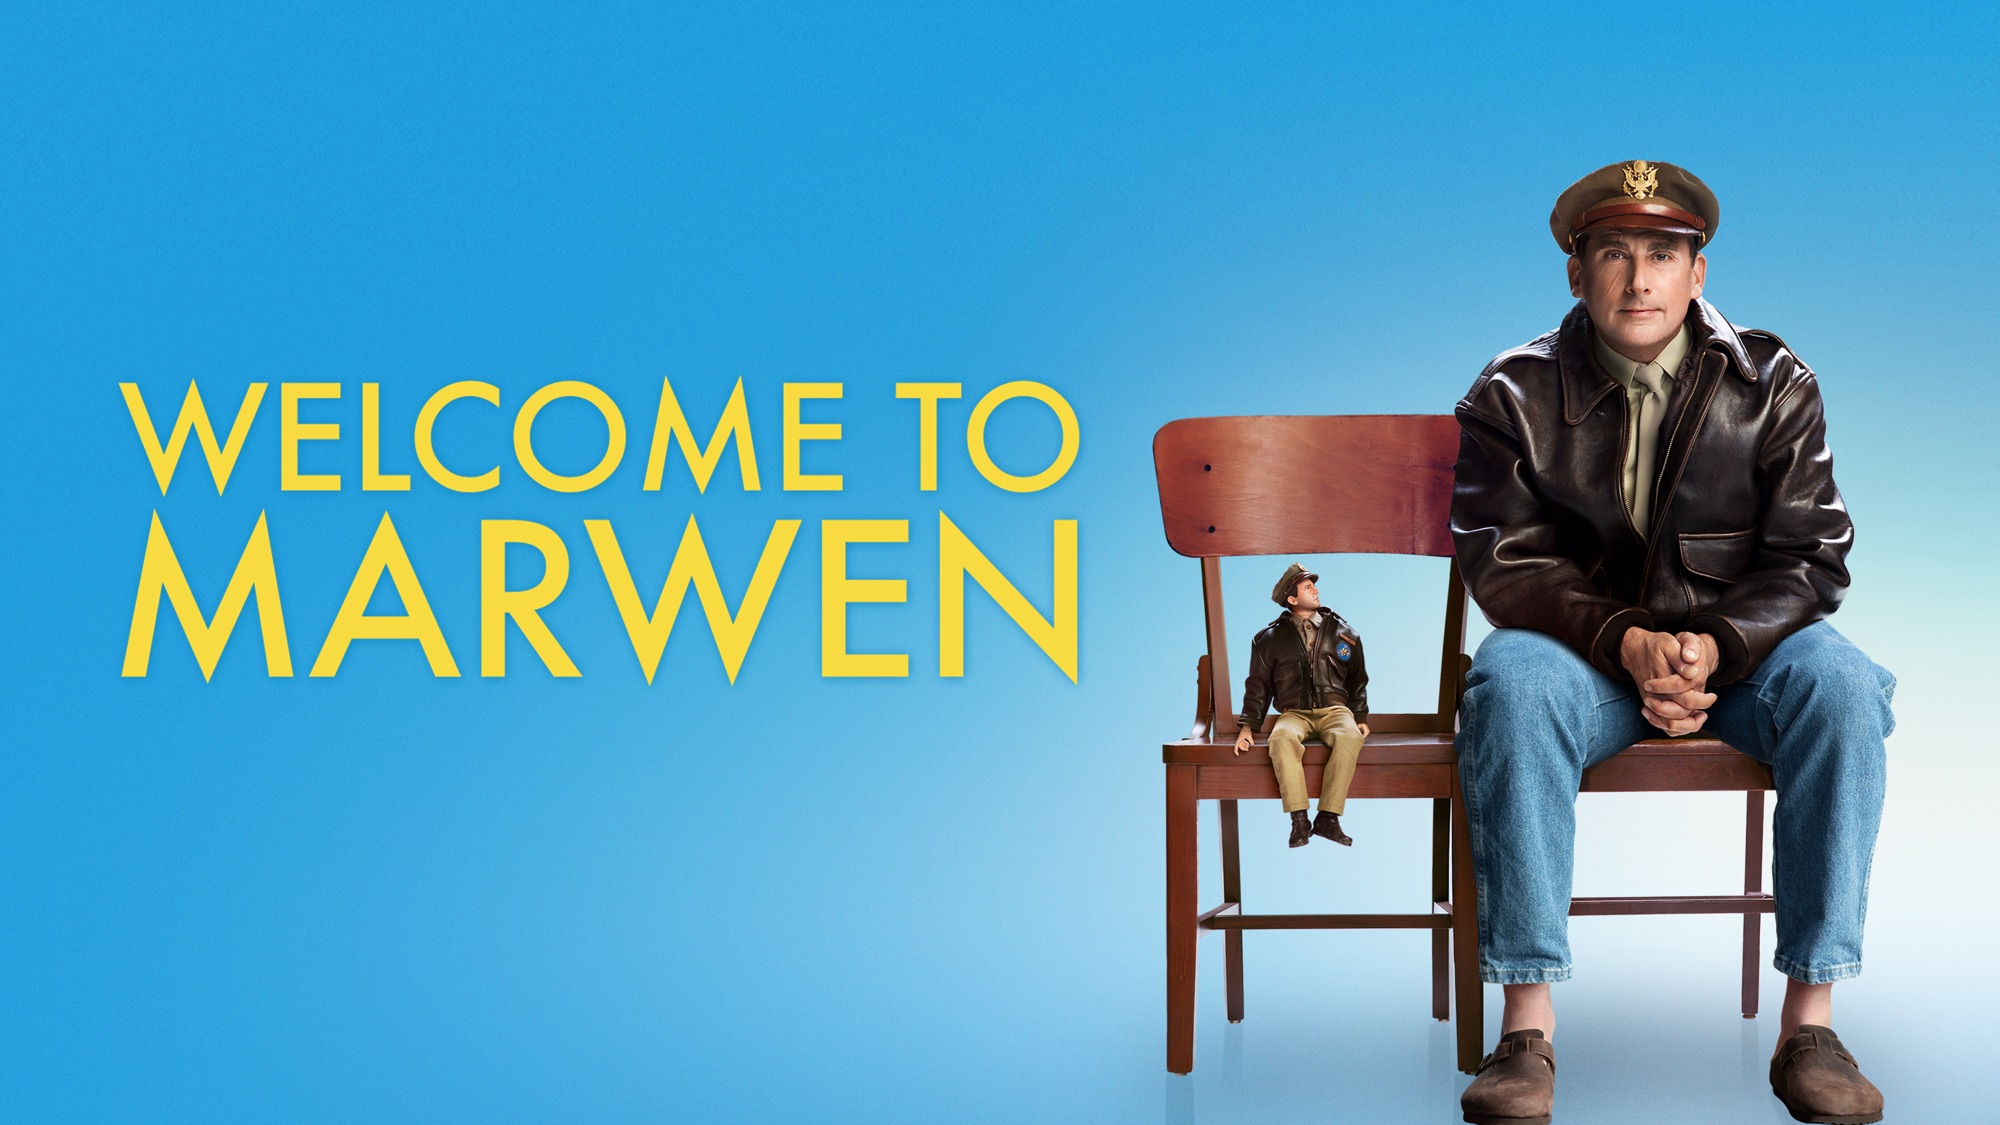 Movie Welcome to Marwen HD Wallpaper | Background Image